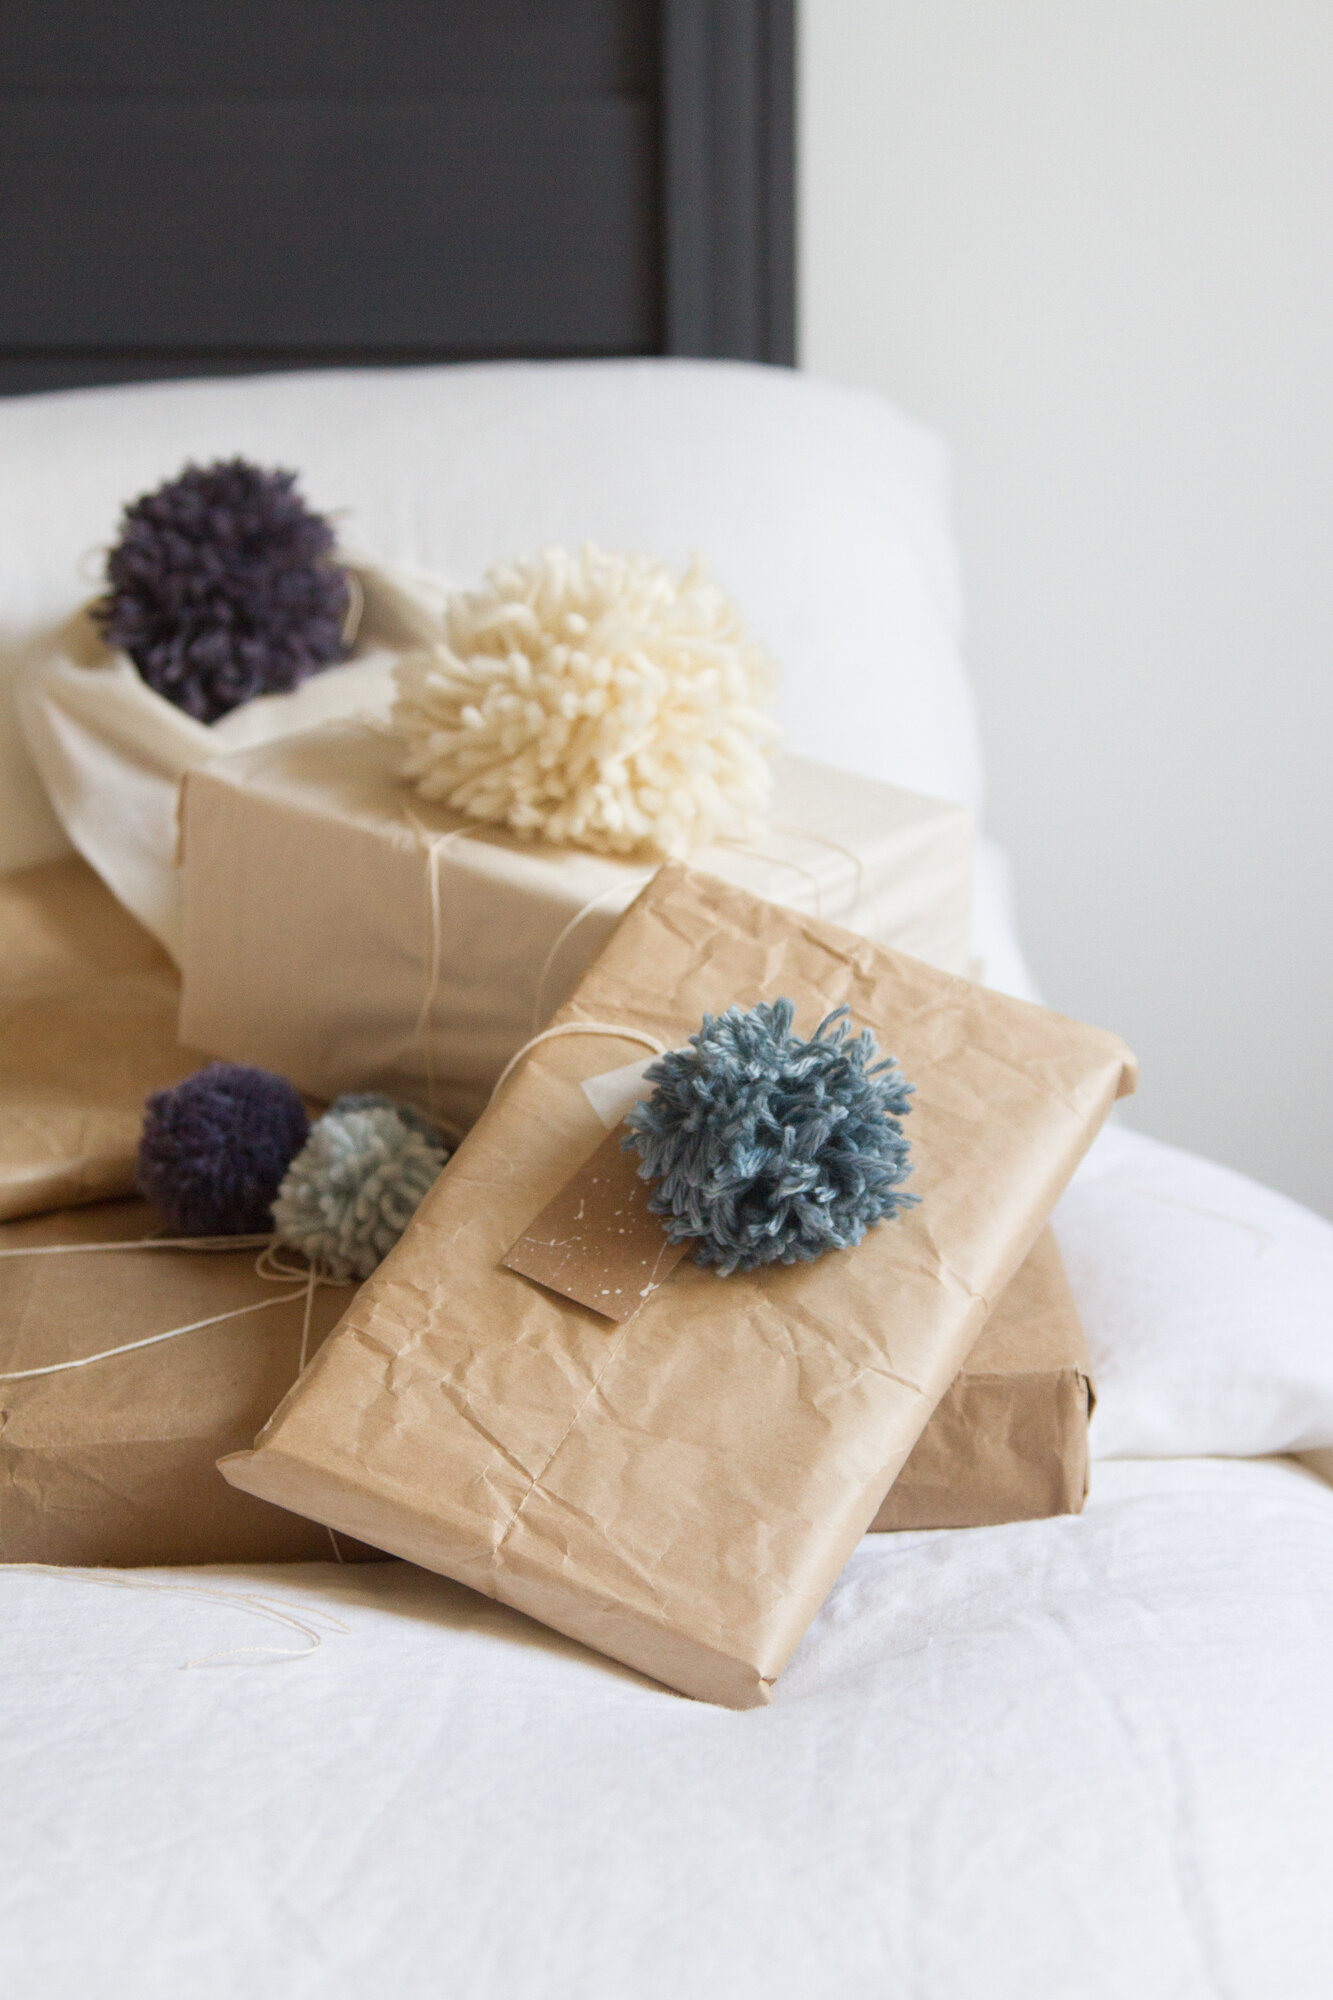 make your own pom-poms and tassels | reading my tea leaves